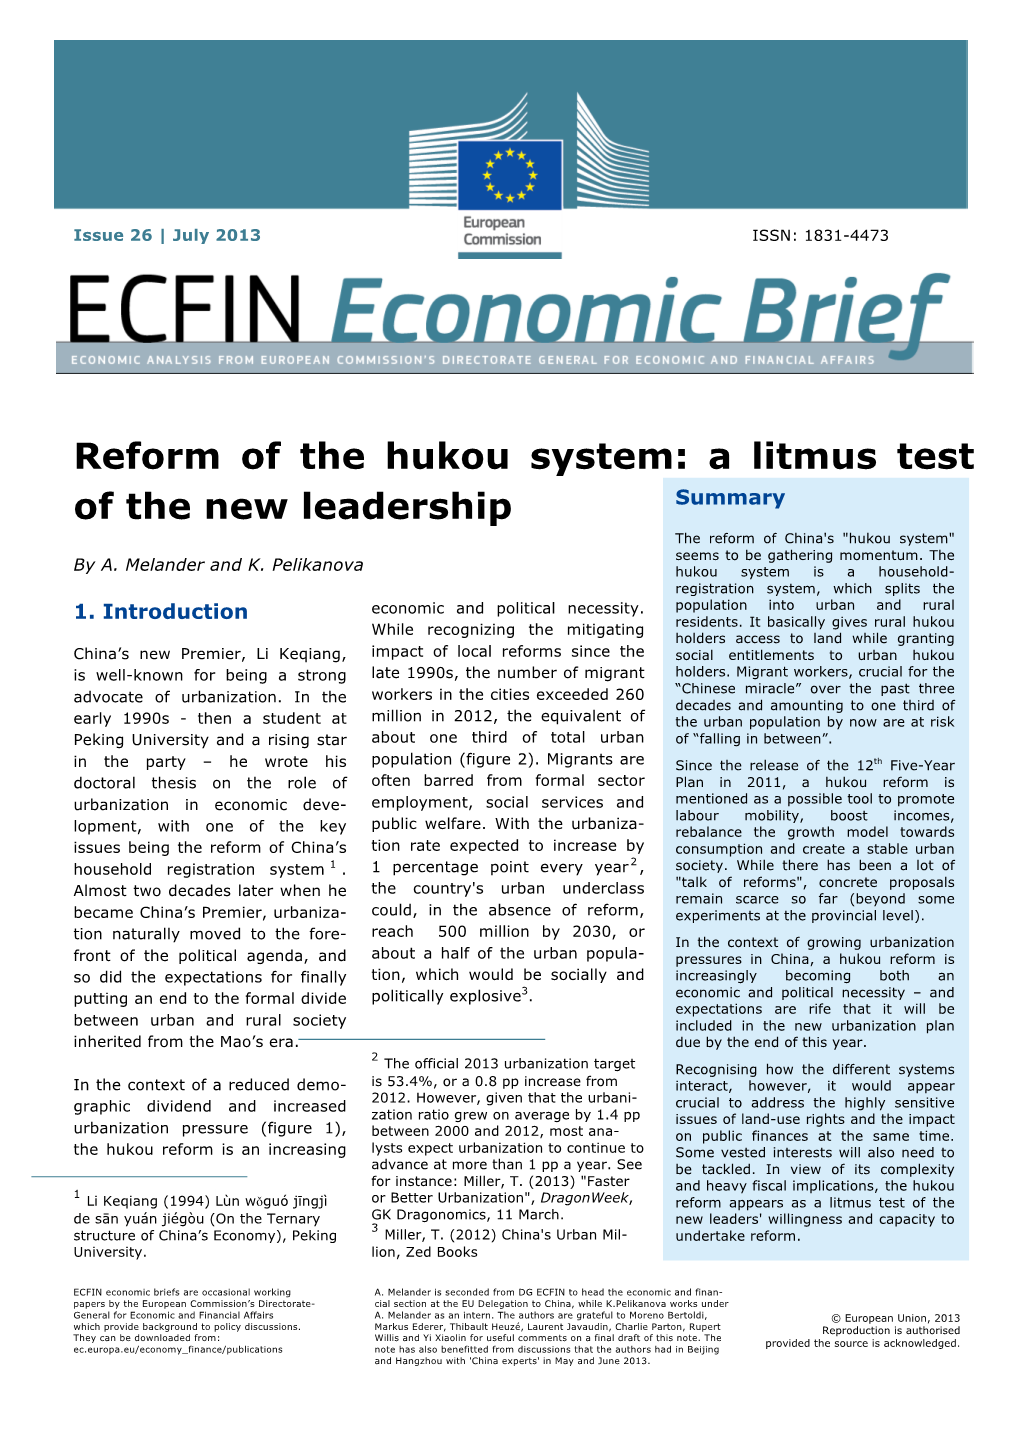 Reform of the Hukou System: a Litmus Test